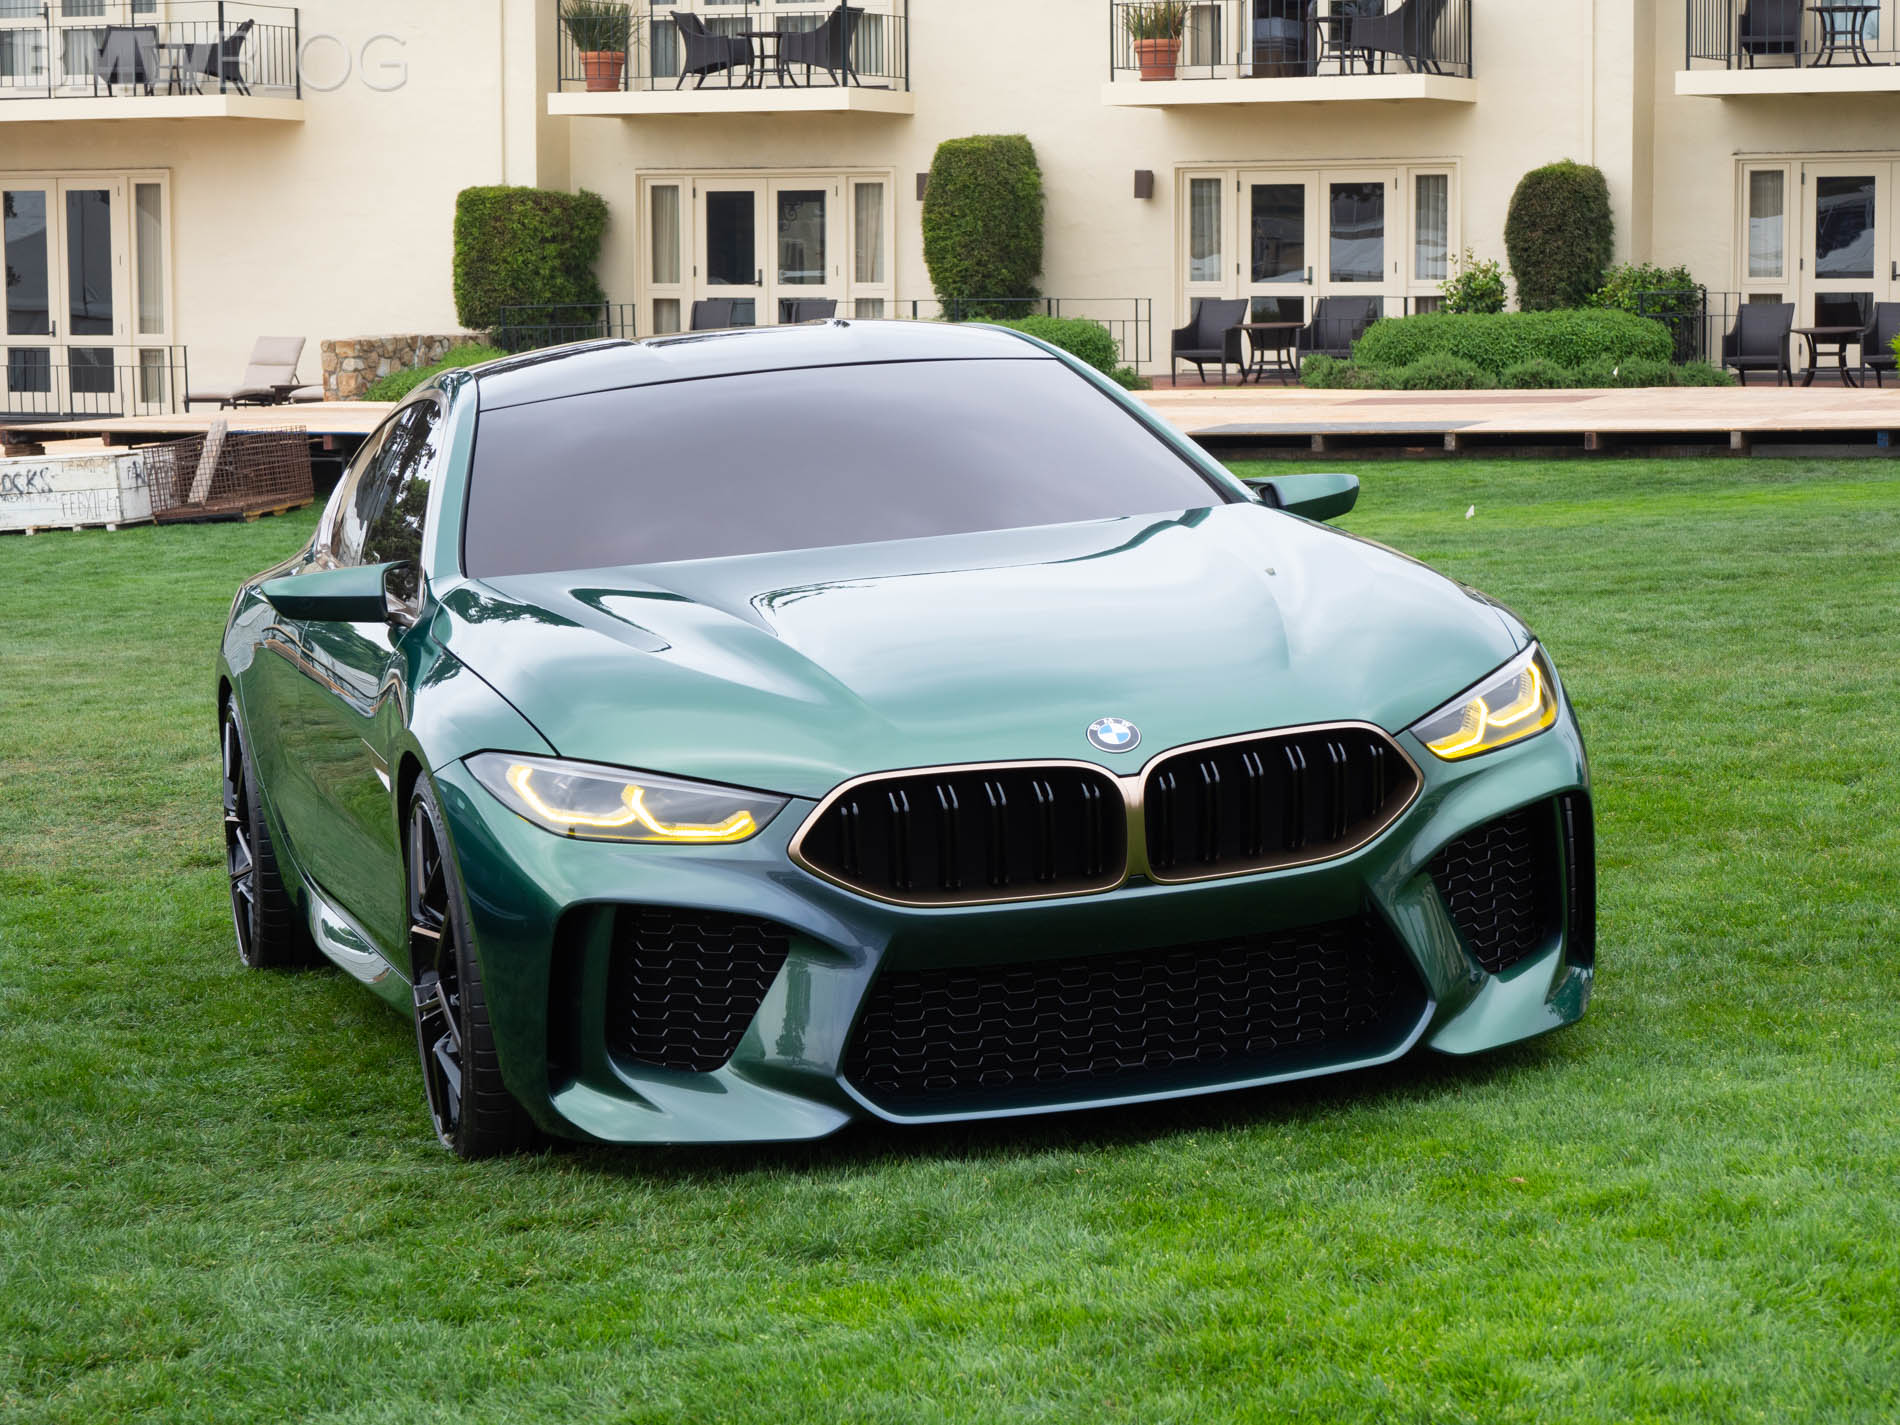 The Future Of Luxury: The 2018 BMW M8 Gran Coupe Concept